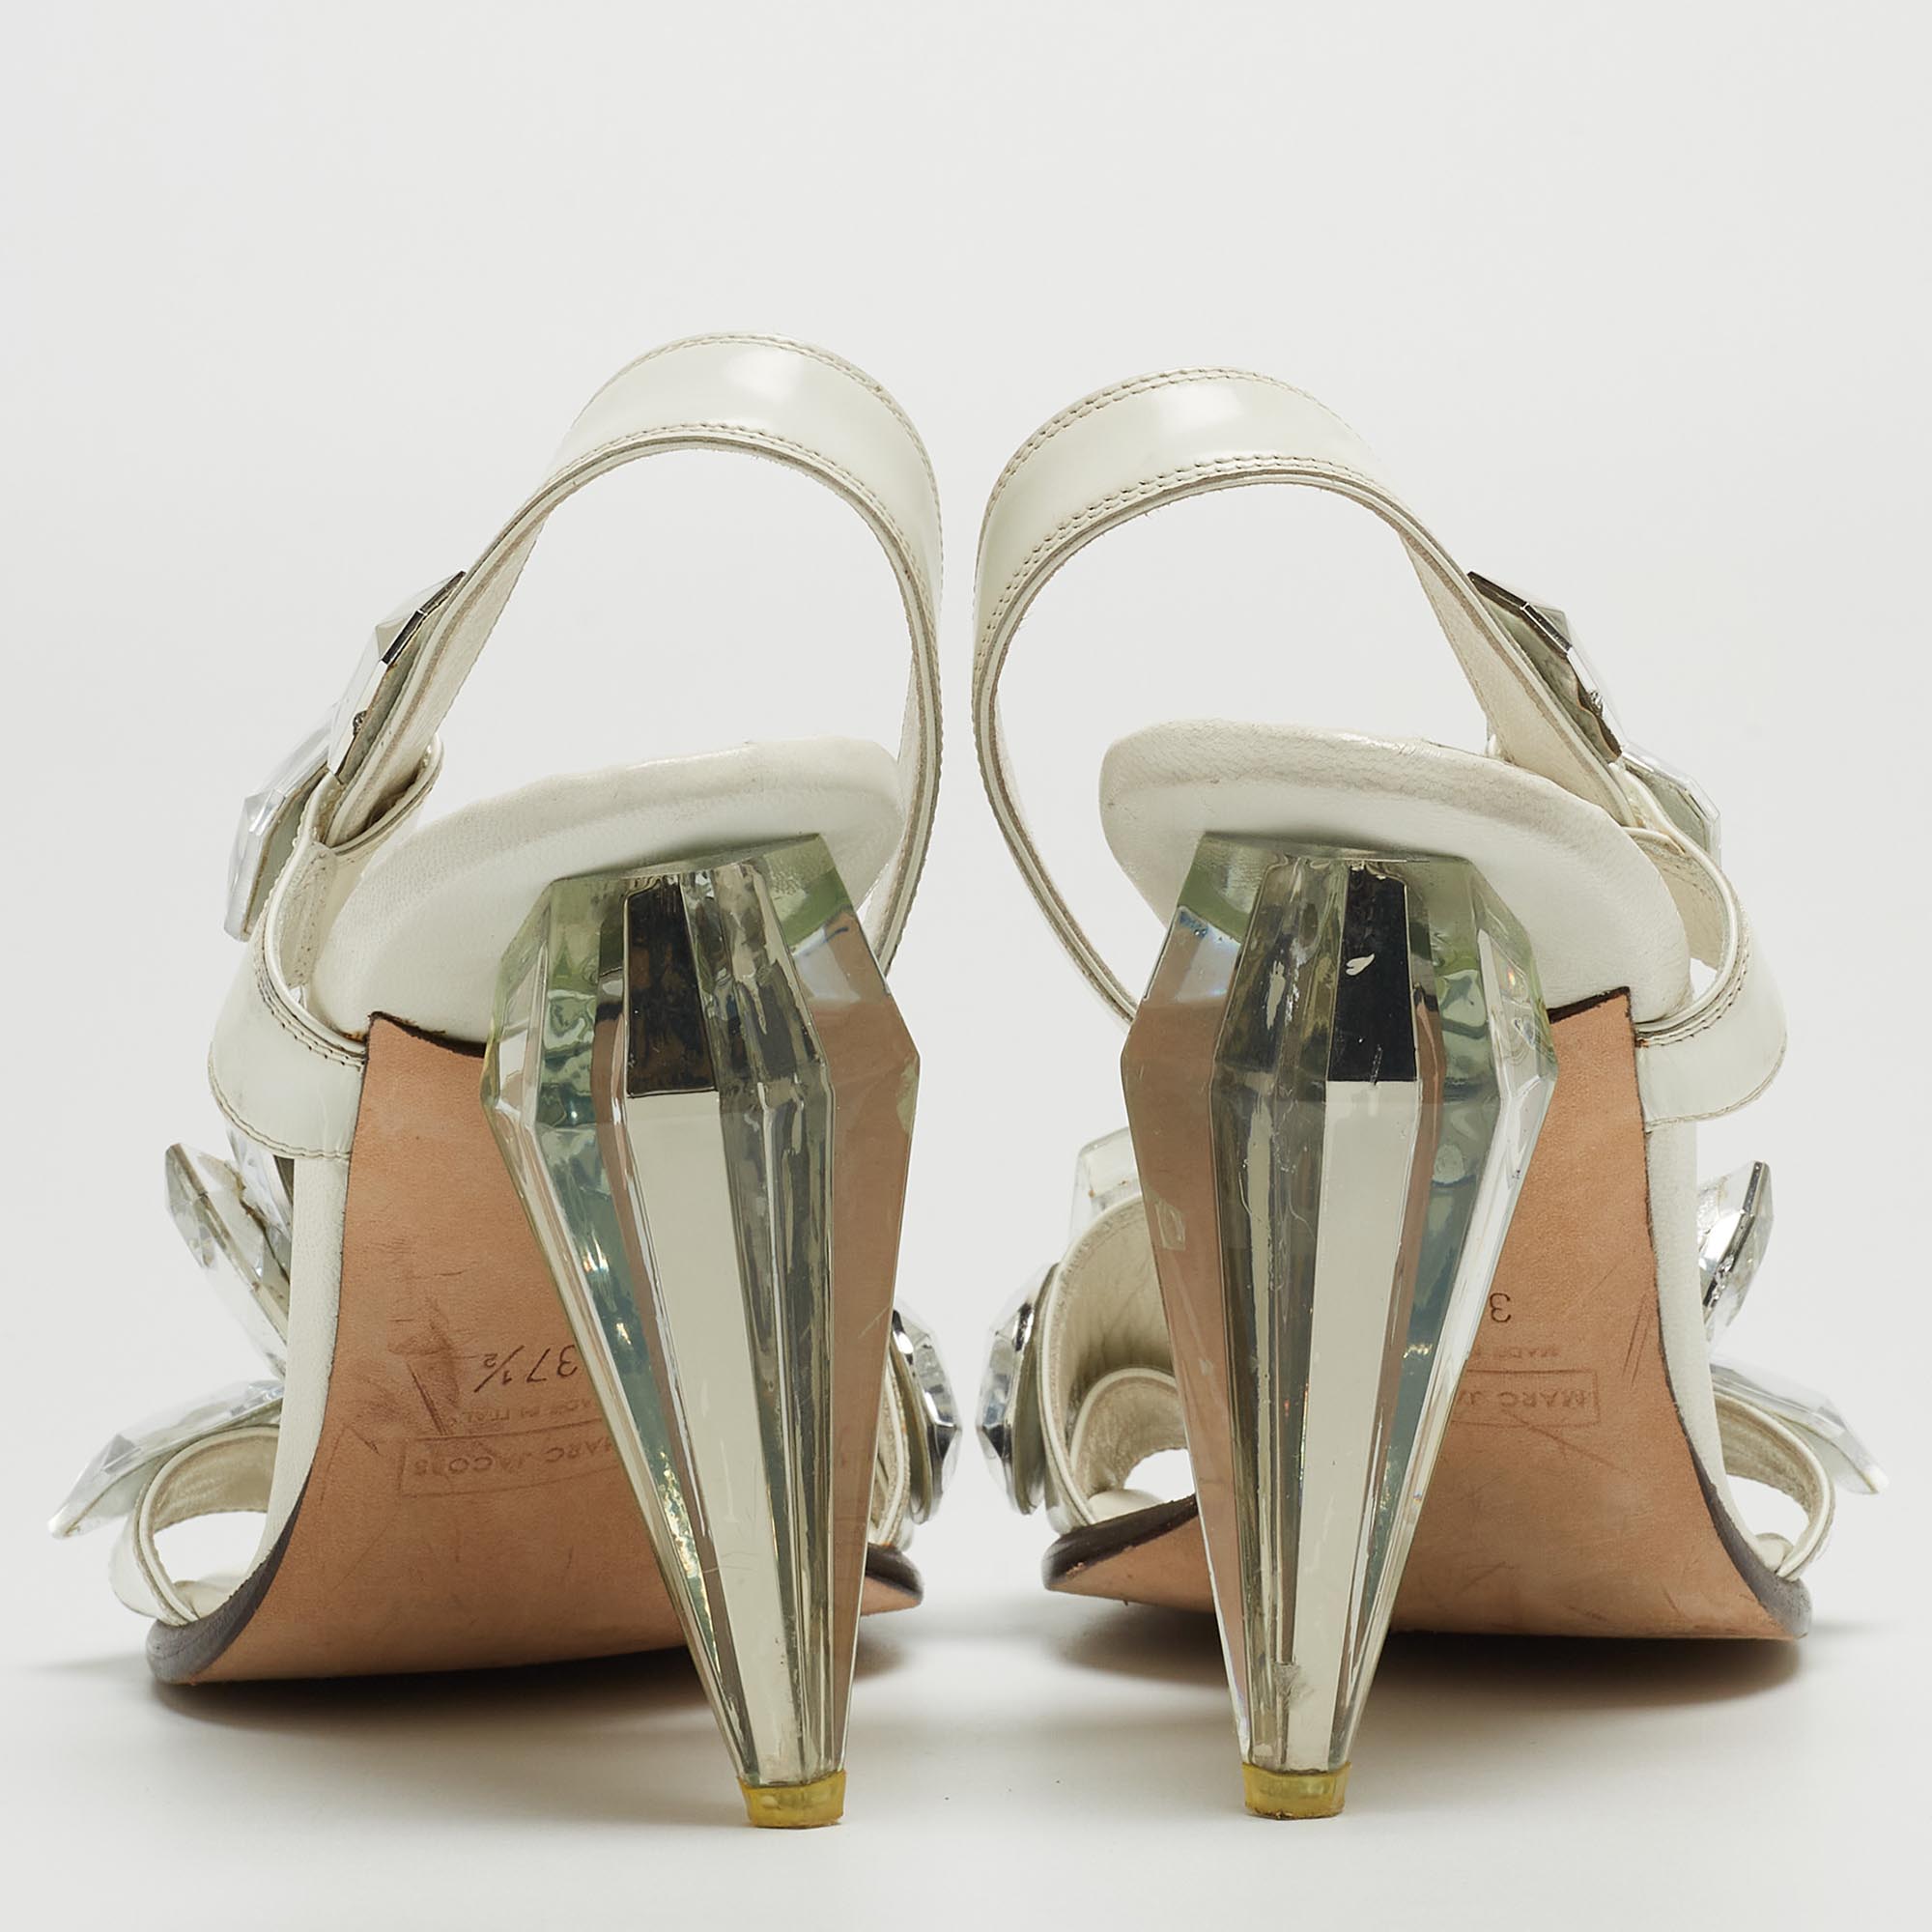 Marc By Marc Jacobs White Leather Crystal Embellished Slingback Sandals Size 37.5